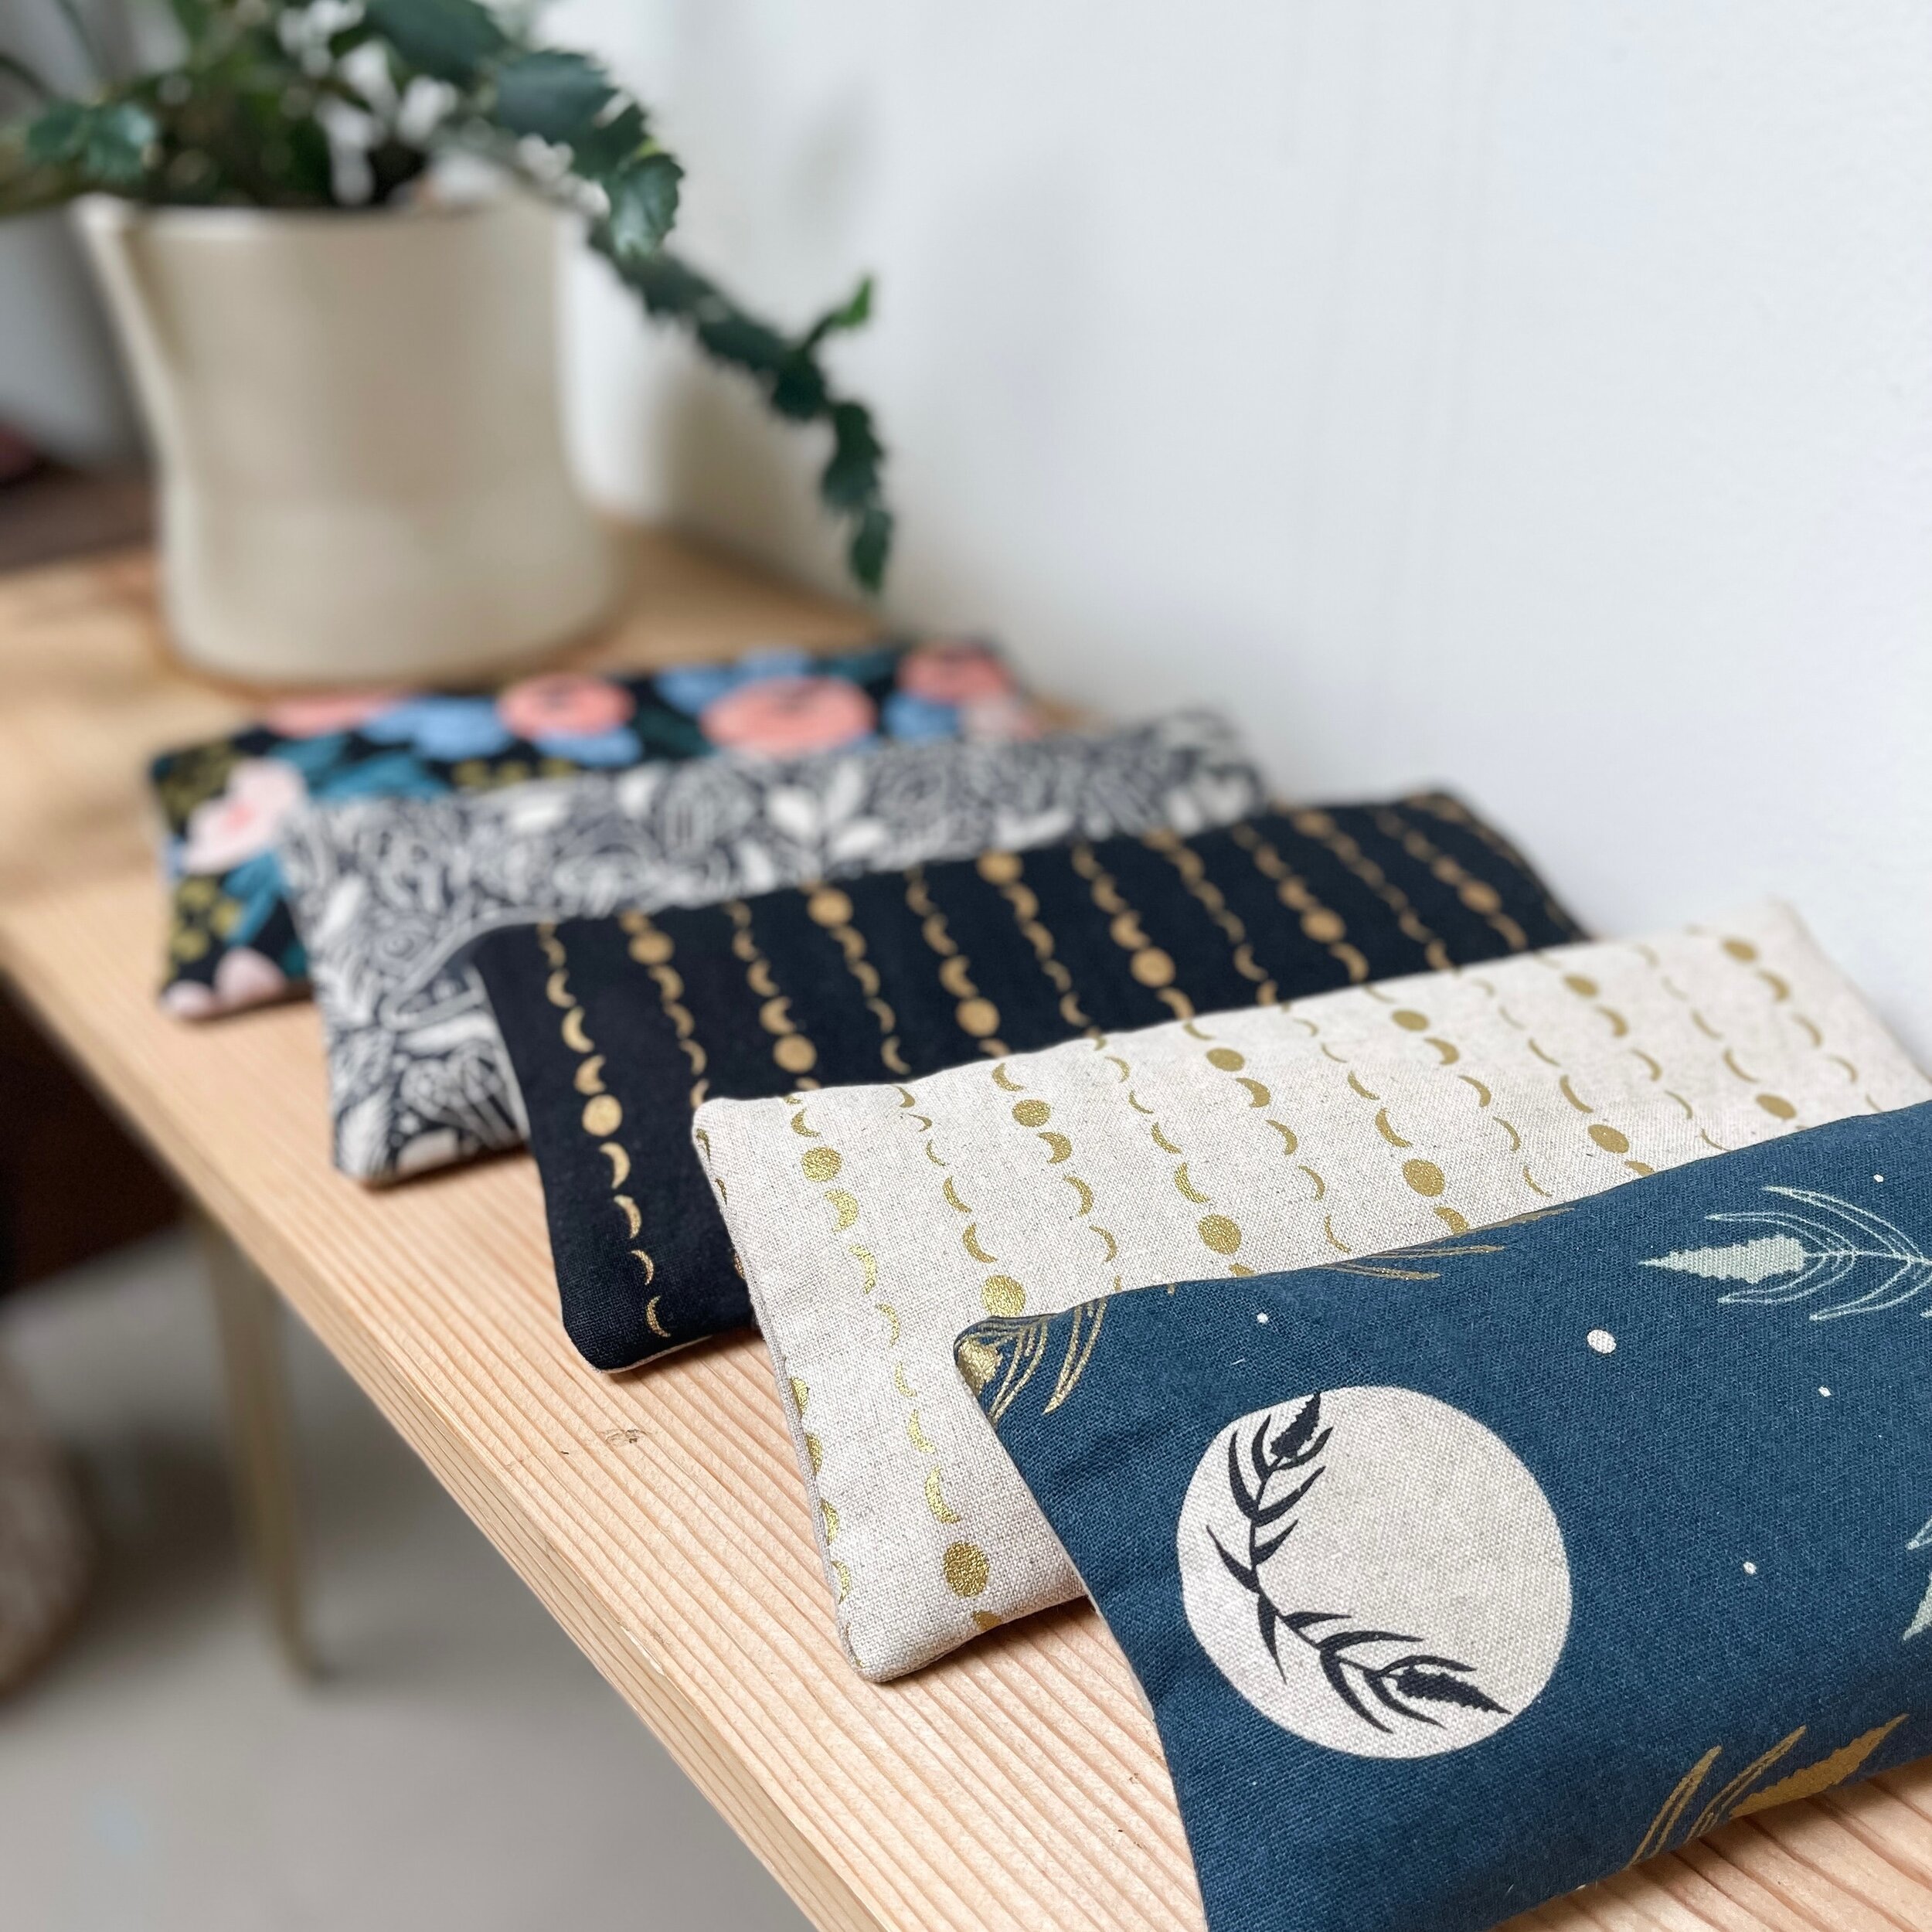 SPRING SALE! 🌼 Use code EQUINOX24 for 25% off all the lovelies. Relax in beauty with our Thompson Eye Pillows. Linen, removable sleeves in beautiful prints. Filled with lavender and flax. Ahhhh 😴 
.
.
.
.
.
.
.
.
#sale #springsale #yogavibes #zen #